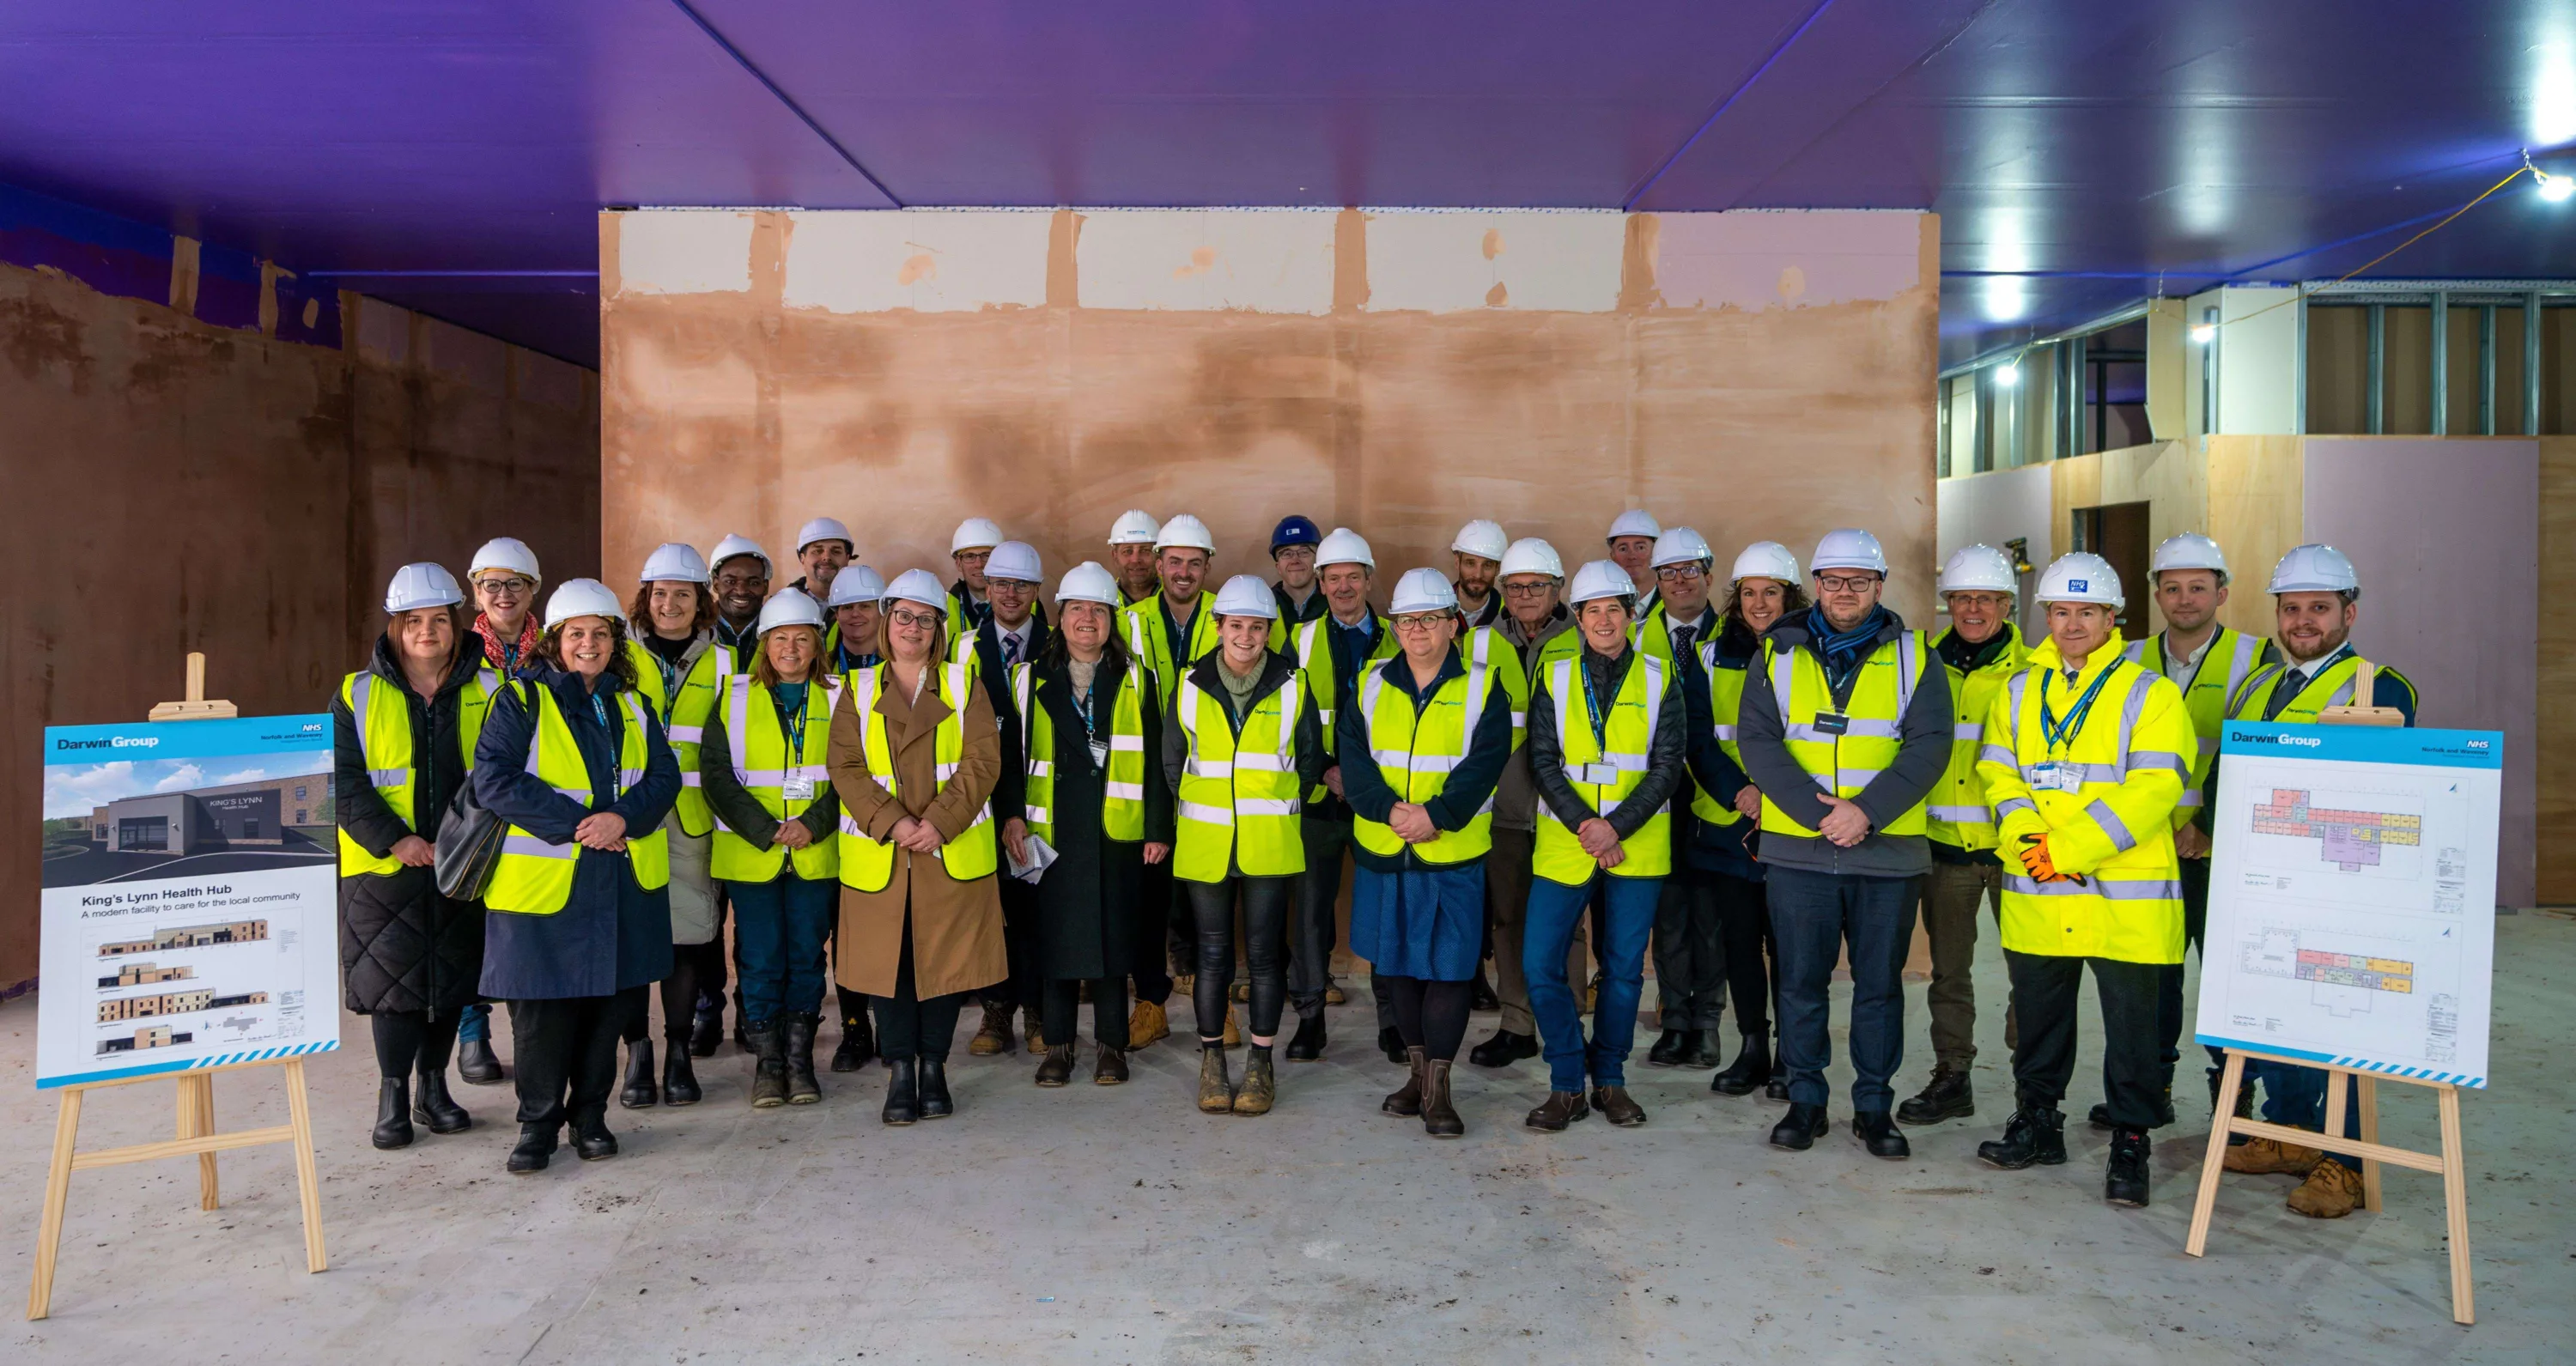 A large group of people in high-vis and hard hats, having just toured the under-construction facility at King's Lynn. The Passive Purple spray coating is still visible on the ceiling and the plaster walls are newly finished.